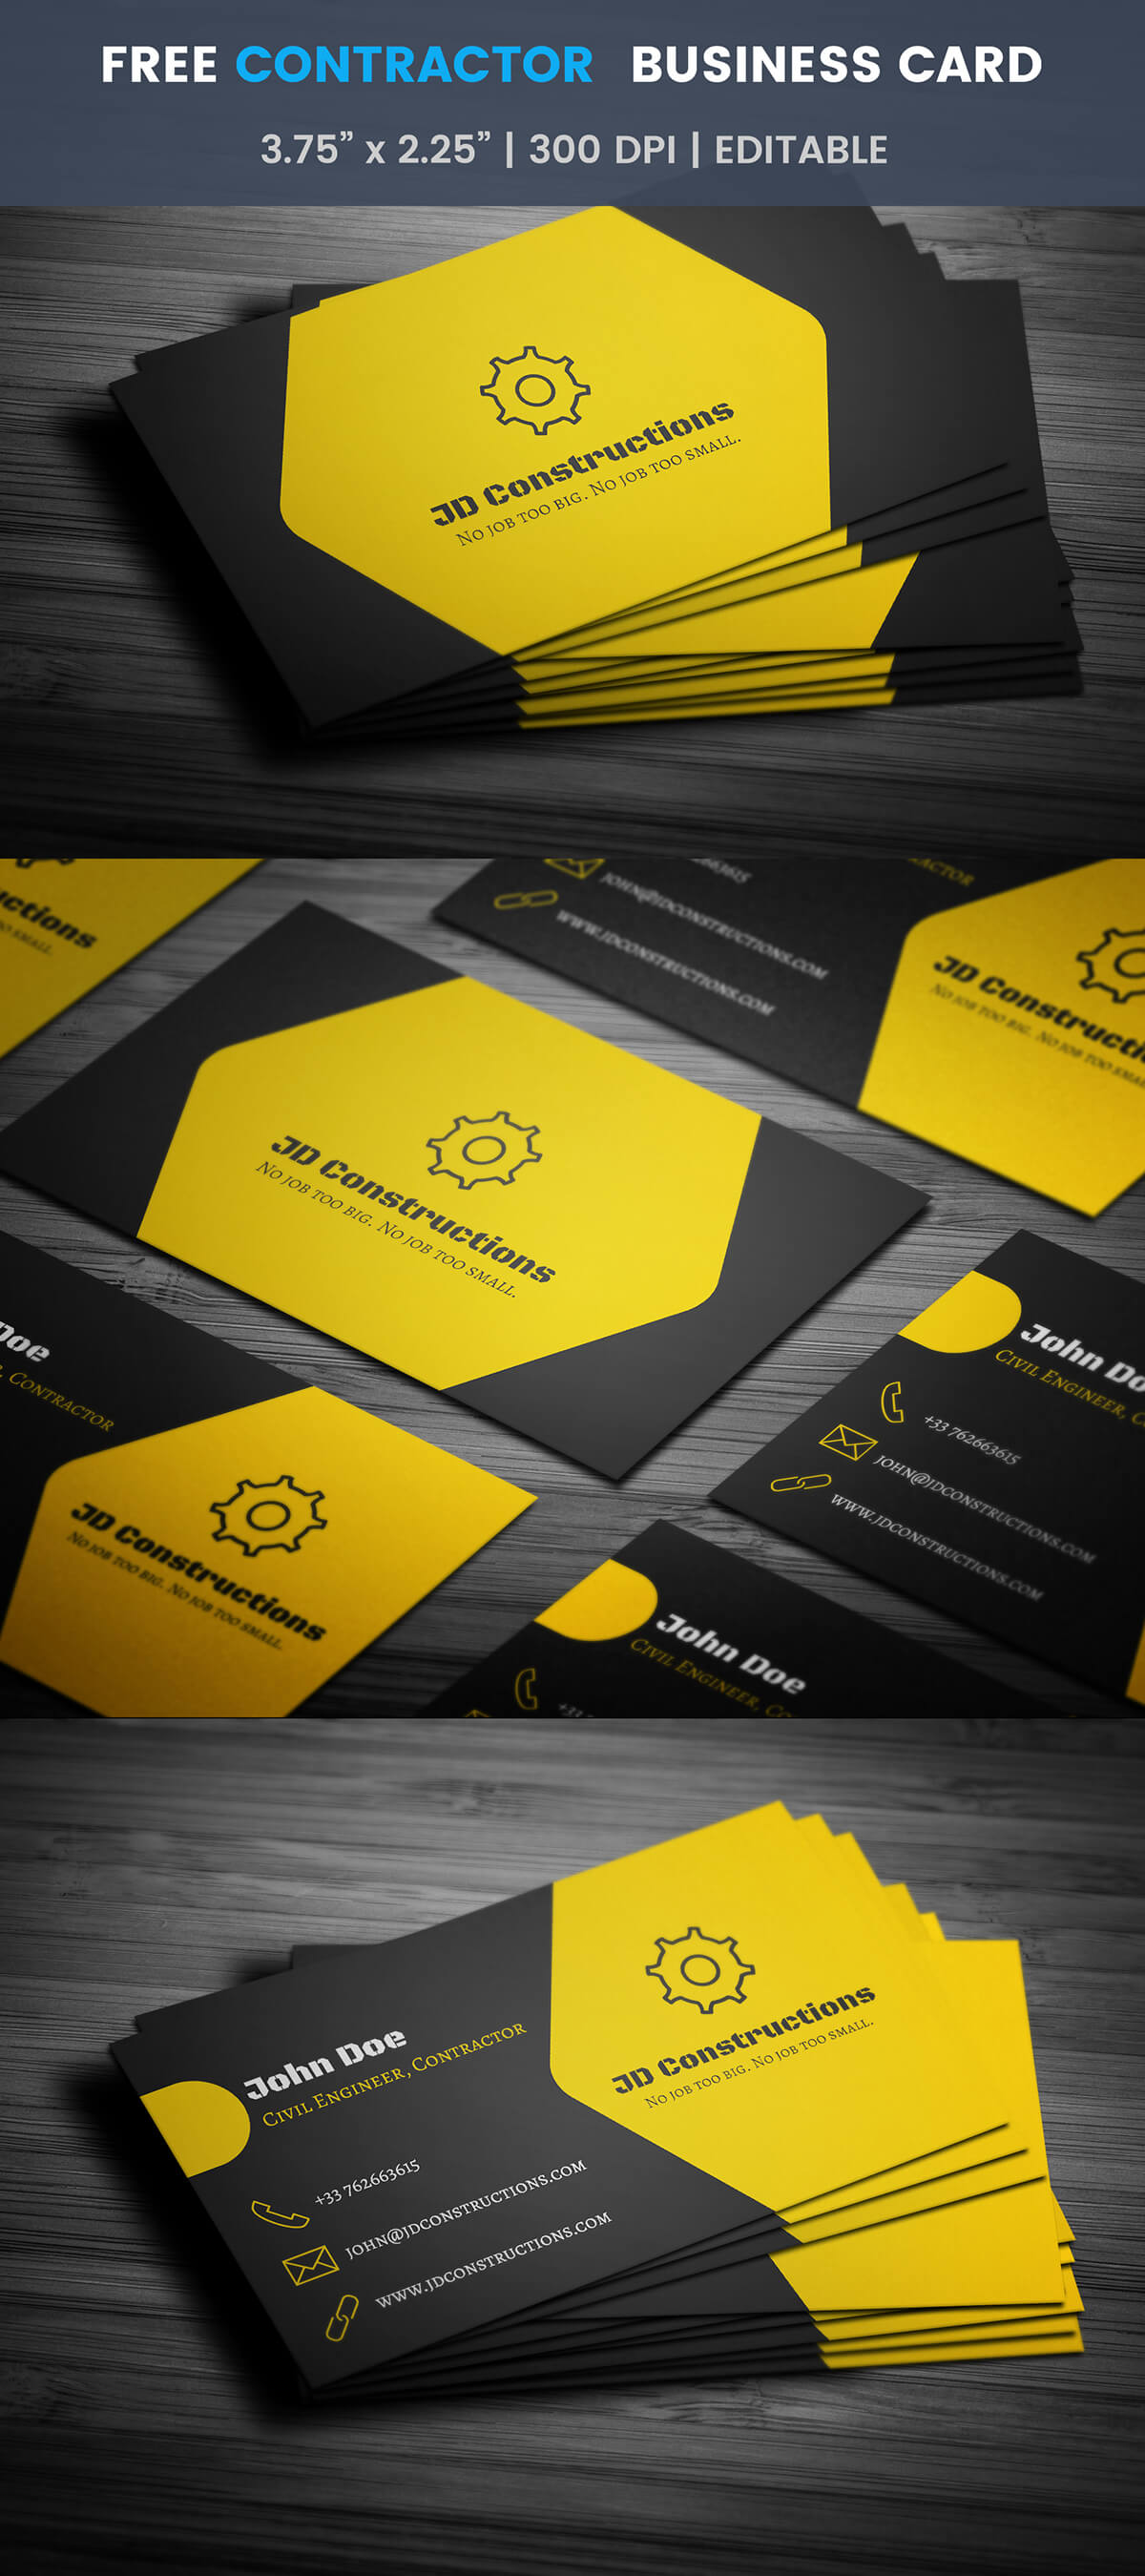 Free Construction Business Card Template On Student Show For Construction Business Card Templates Download Free